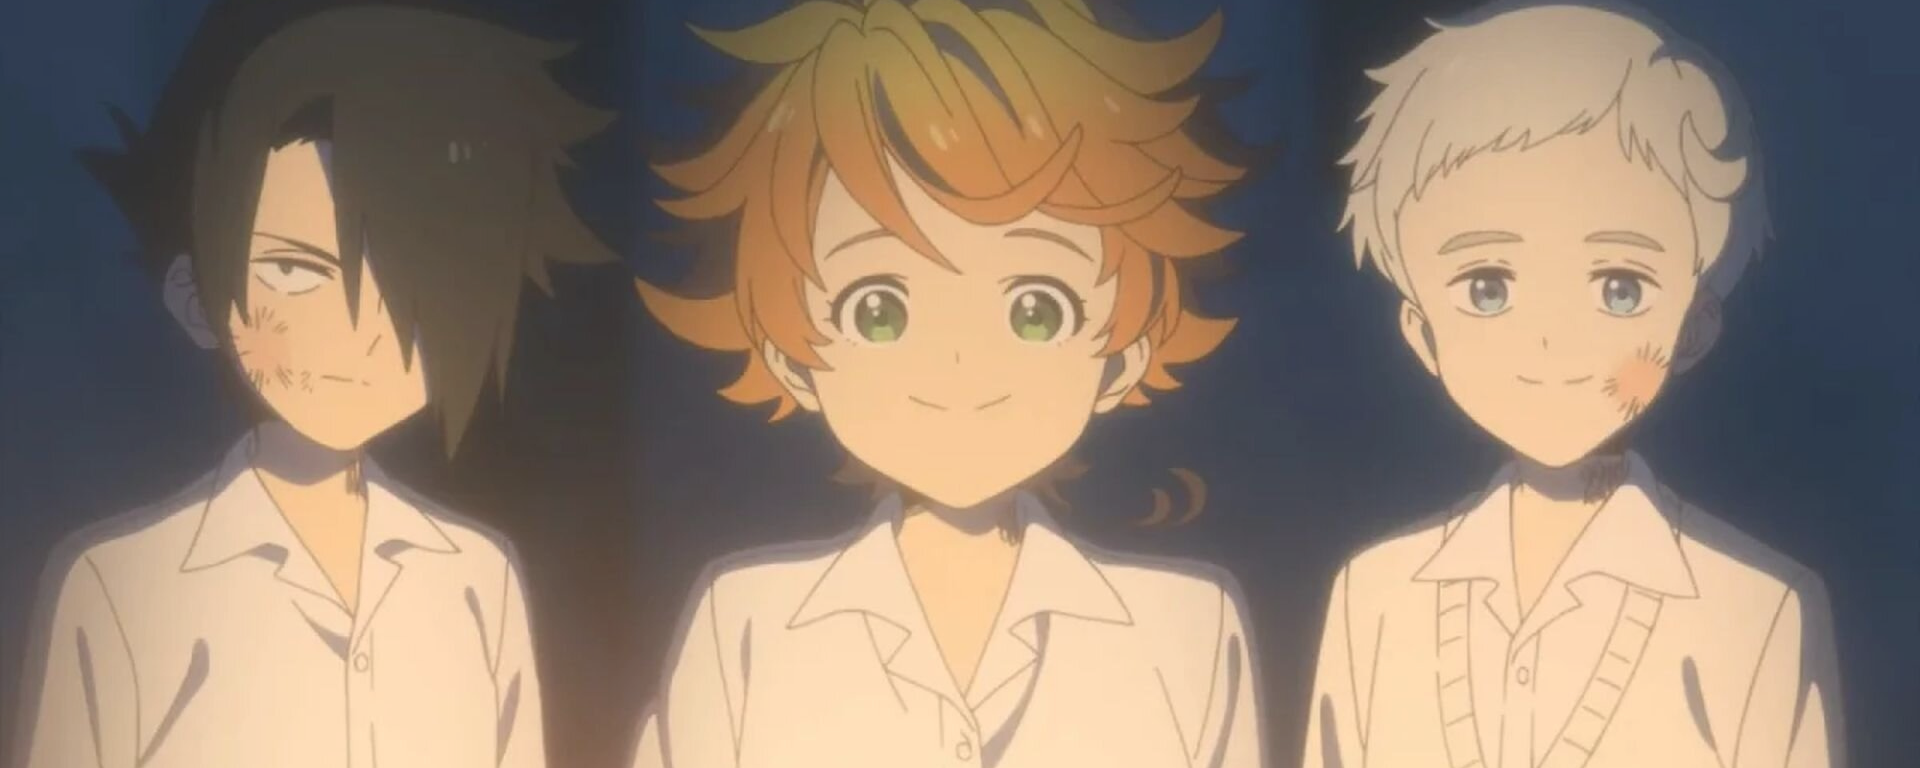 Promised Neverland Live-Action TV Show In The Works At